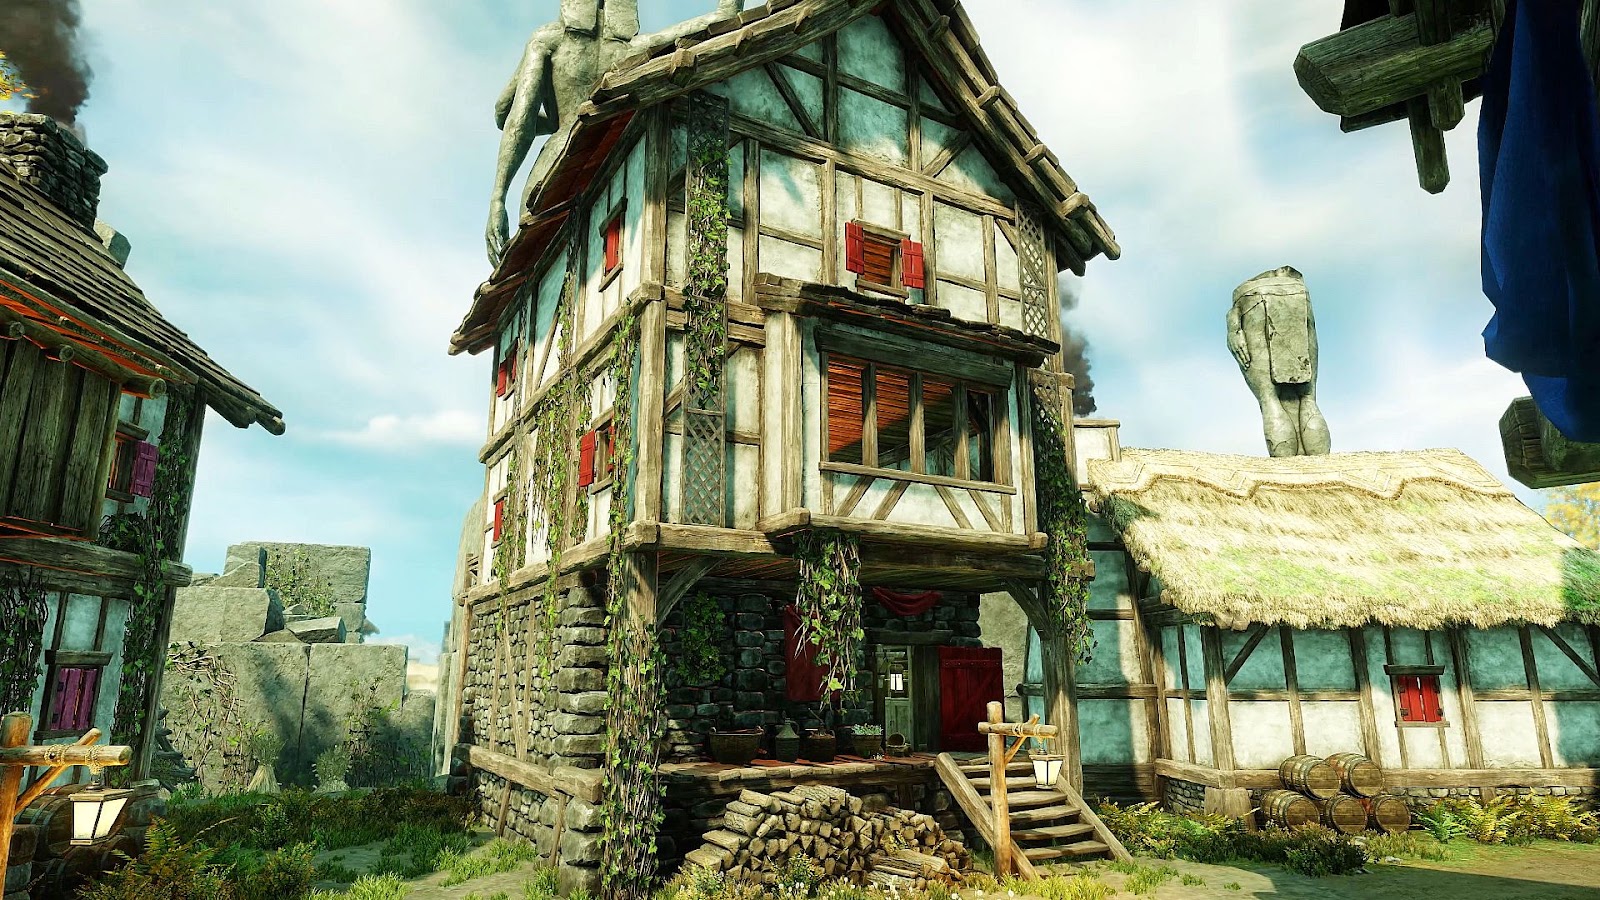 One of many houses available for rent in New World